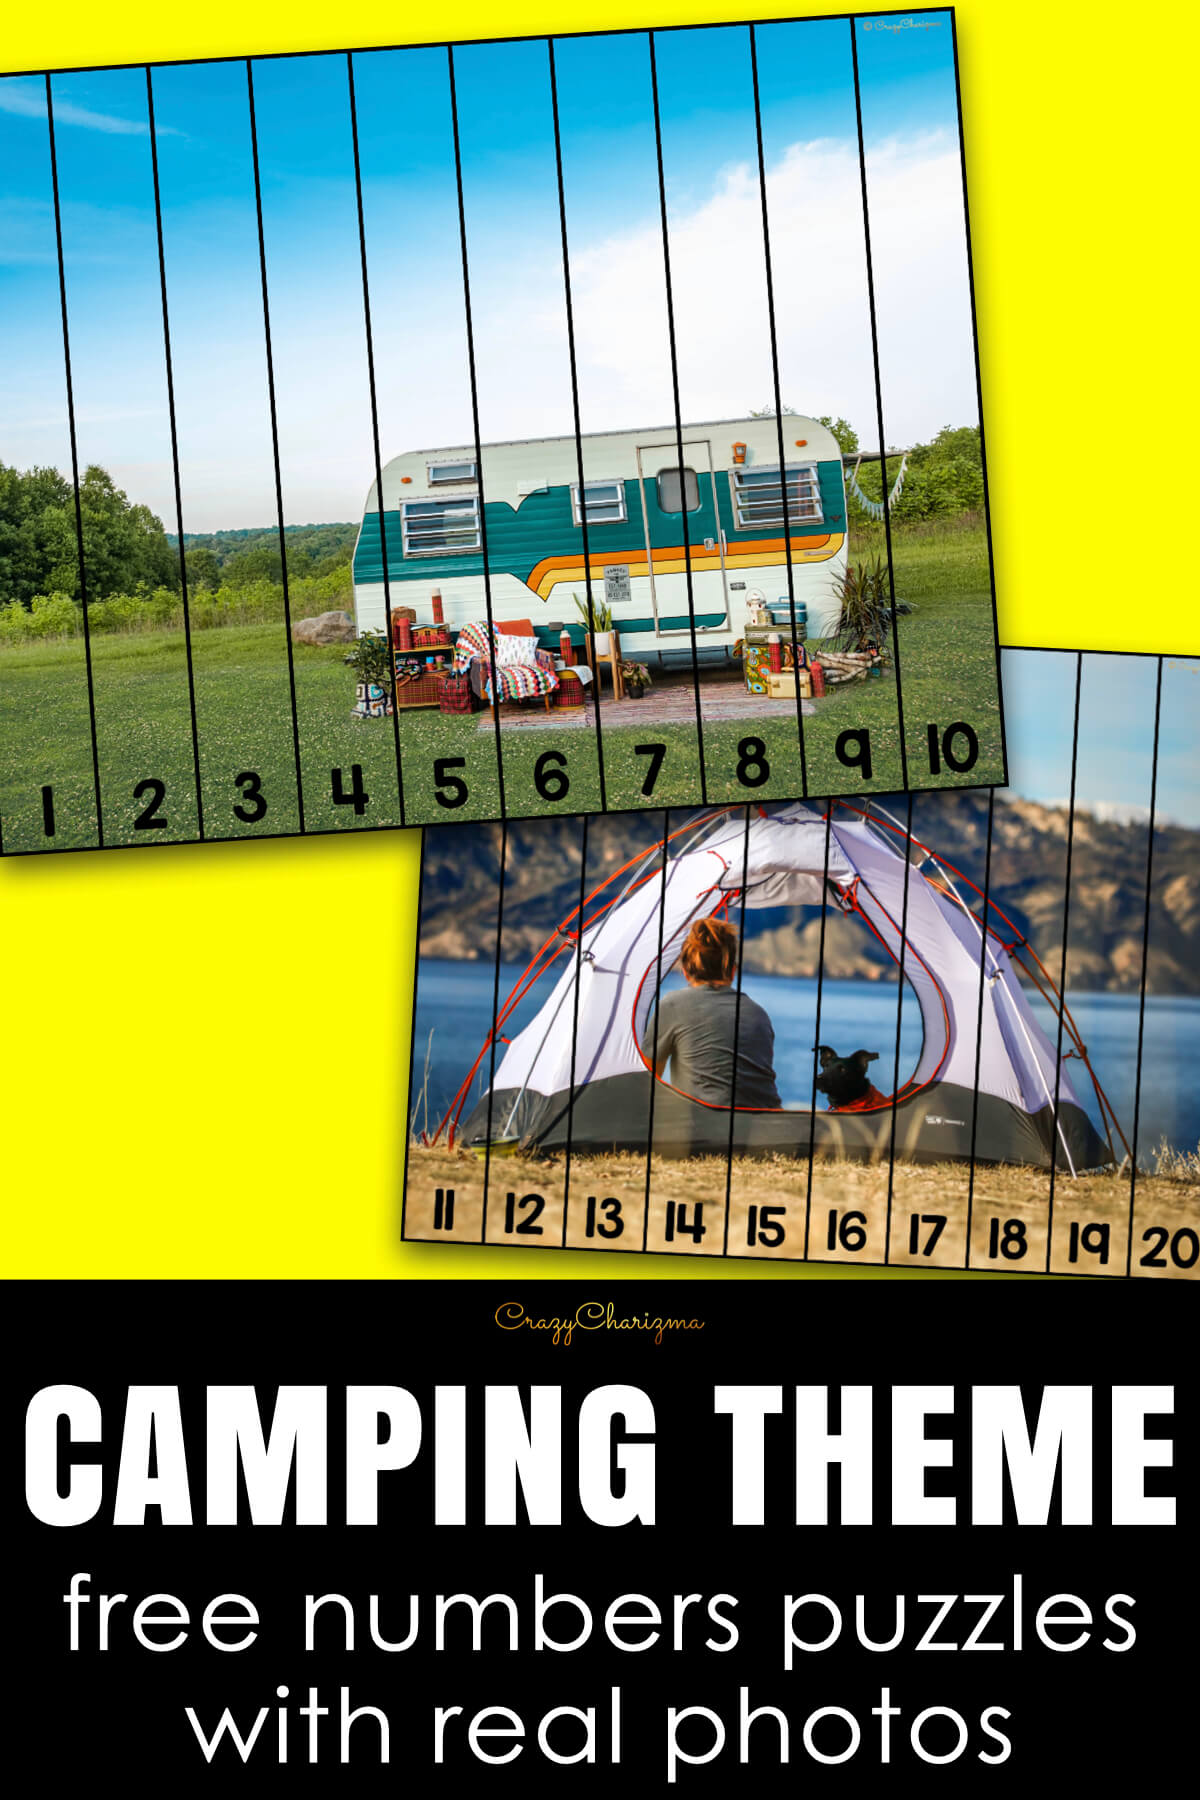 Explore engaging camping math activities for kids! Download free numbers puzzles with real camping-themed photos. Let the camping math adventure begin!